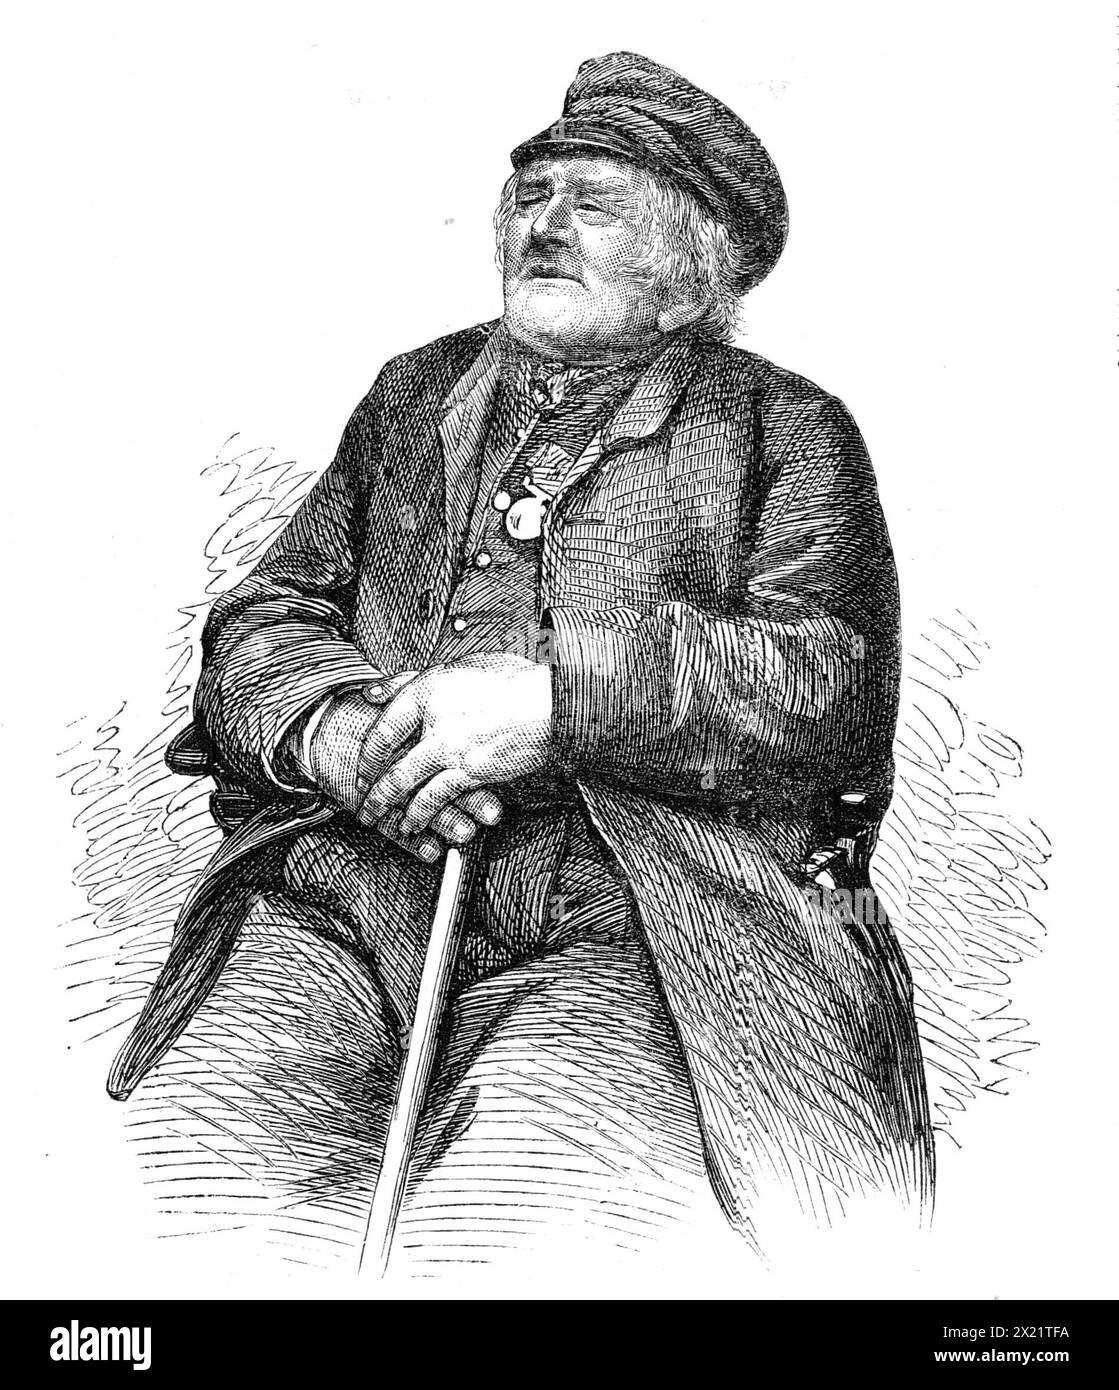 John Gilliatt, of Brigg, Lincolnshire, above one hundred years old, 1864. Engraving from a photograph by Mr. Empringham, master of the Brigg Union Workhouse, of a '...remarkable veteran...born...according to his own belief, in the year 1761. If he be right in this date he has attained the age of 103...In his early manhood he was pressed into the Navy...He does not seem to have remained long at sea, for about 1791 he enlisted into the 7th Dragoons. This regiment being sent into Holland, he...[fought in] the campaign of 1793...in a personal conflict with a French cavalry soldier, he lost the mid Stock Photo